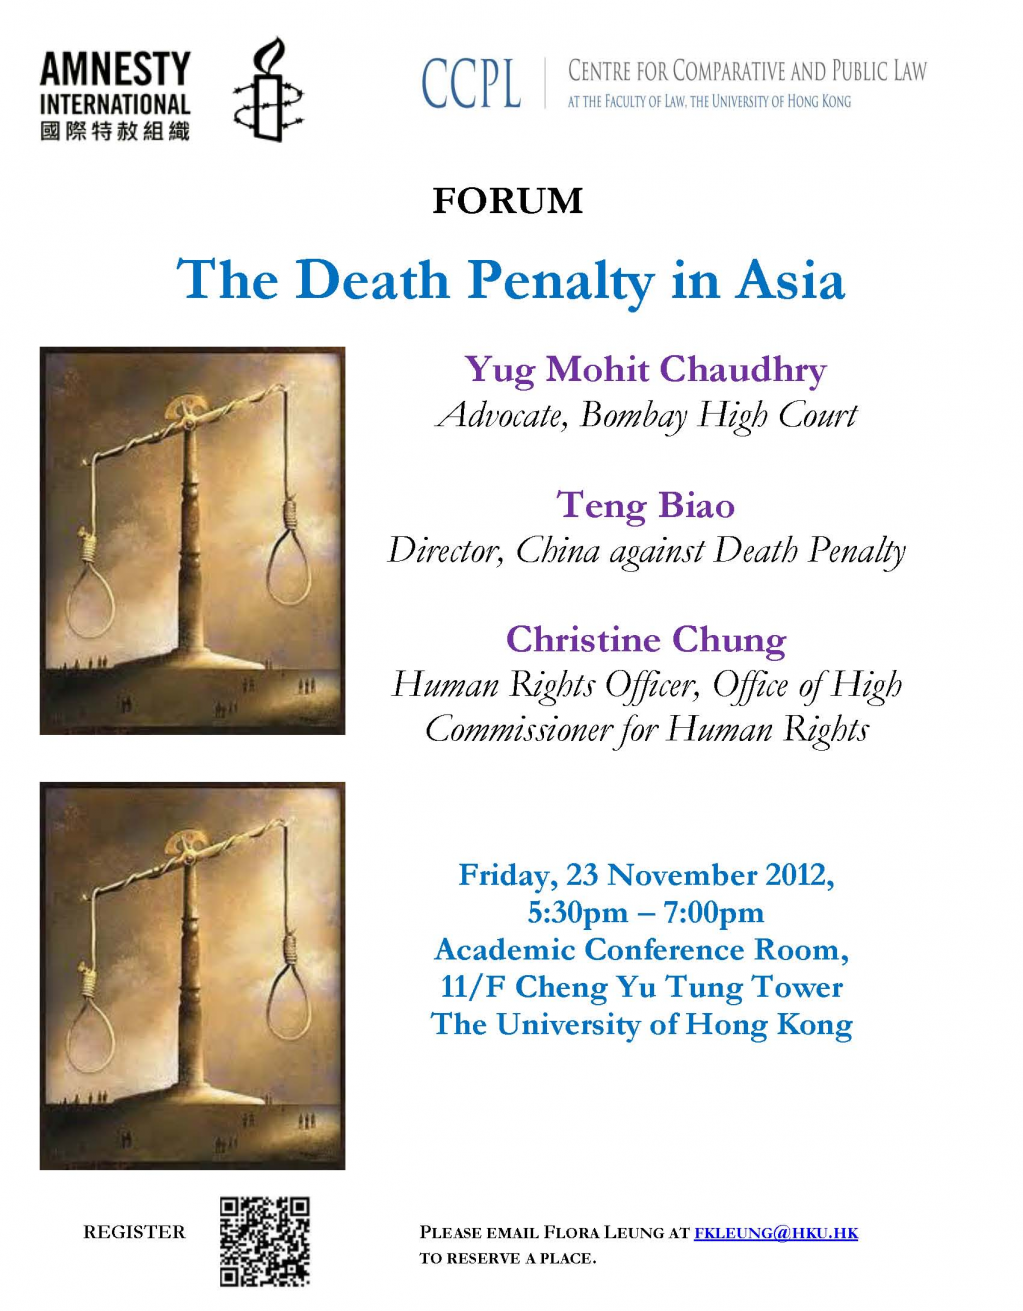 Forum:  The Death Penalty in Asia